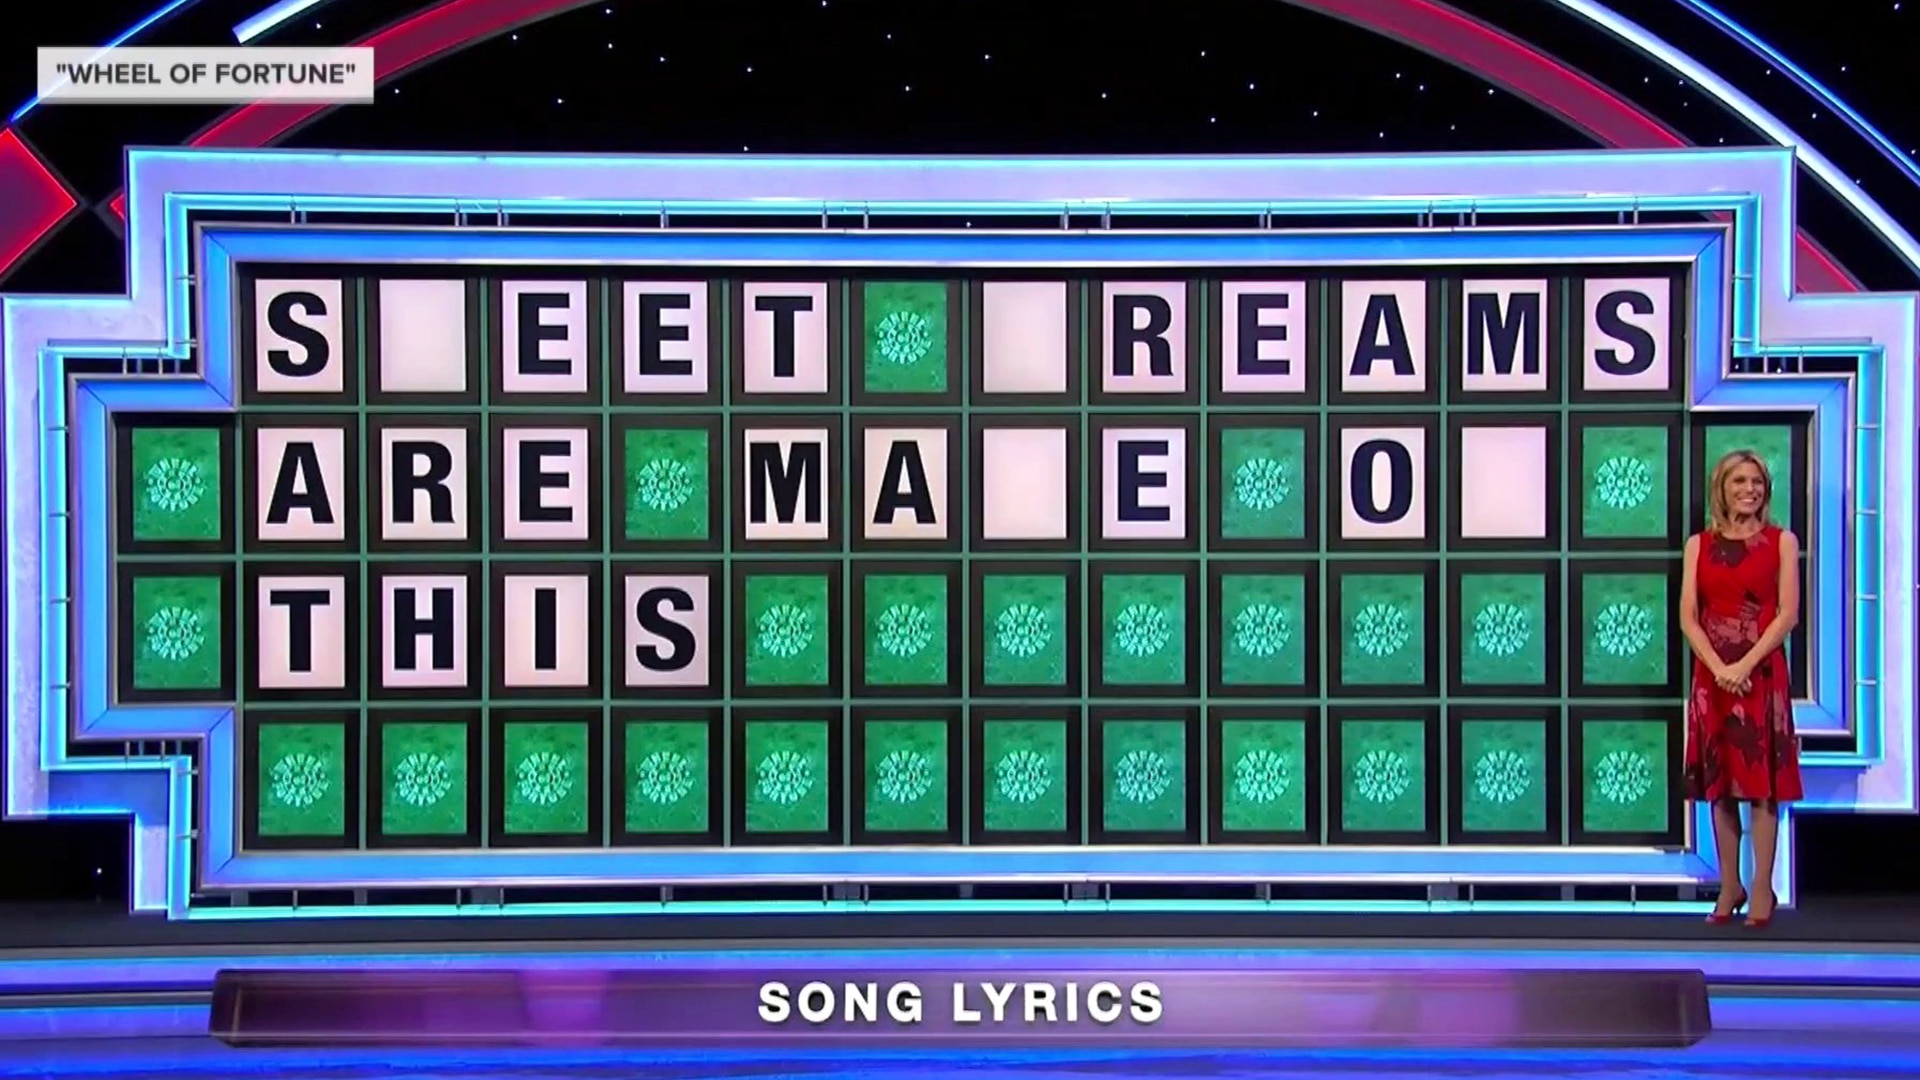 Watch TODAY Excerpt ‘Wheel of Fortune’ contestant flubs popular ‘Sweet